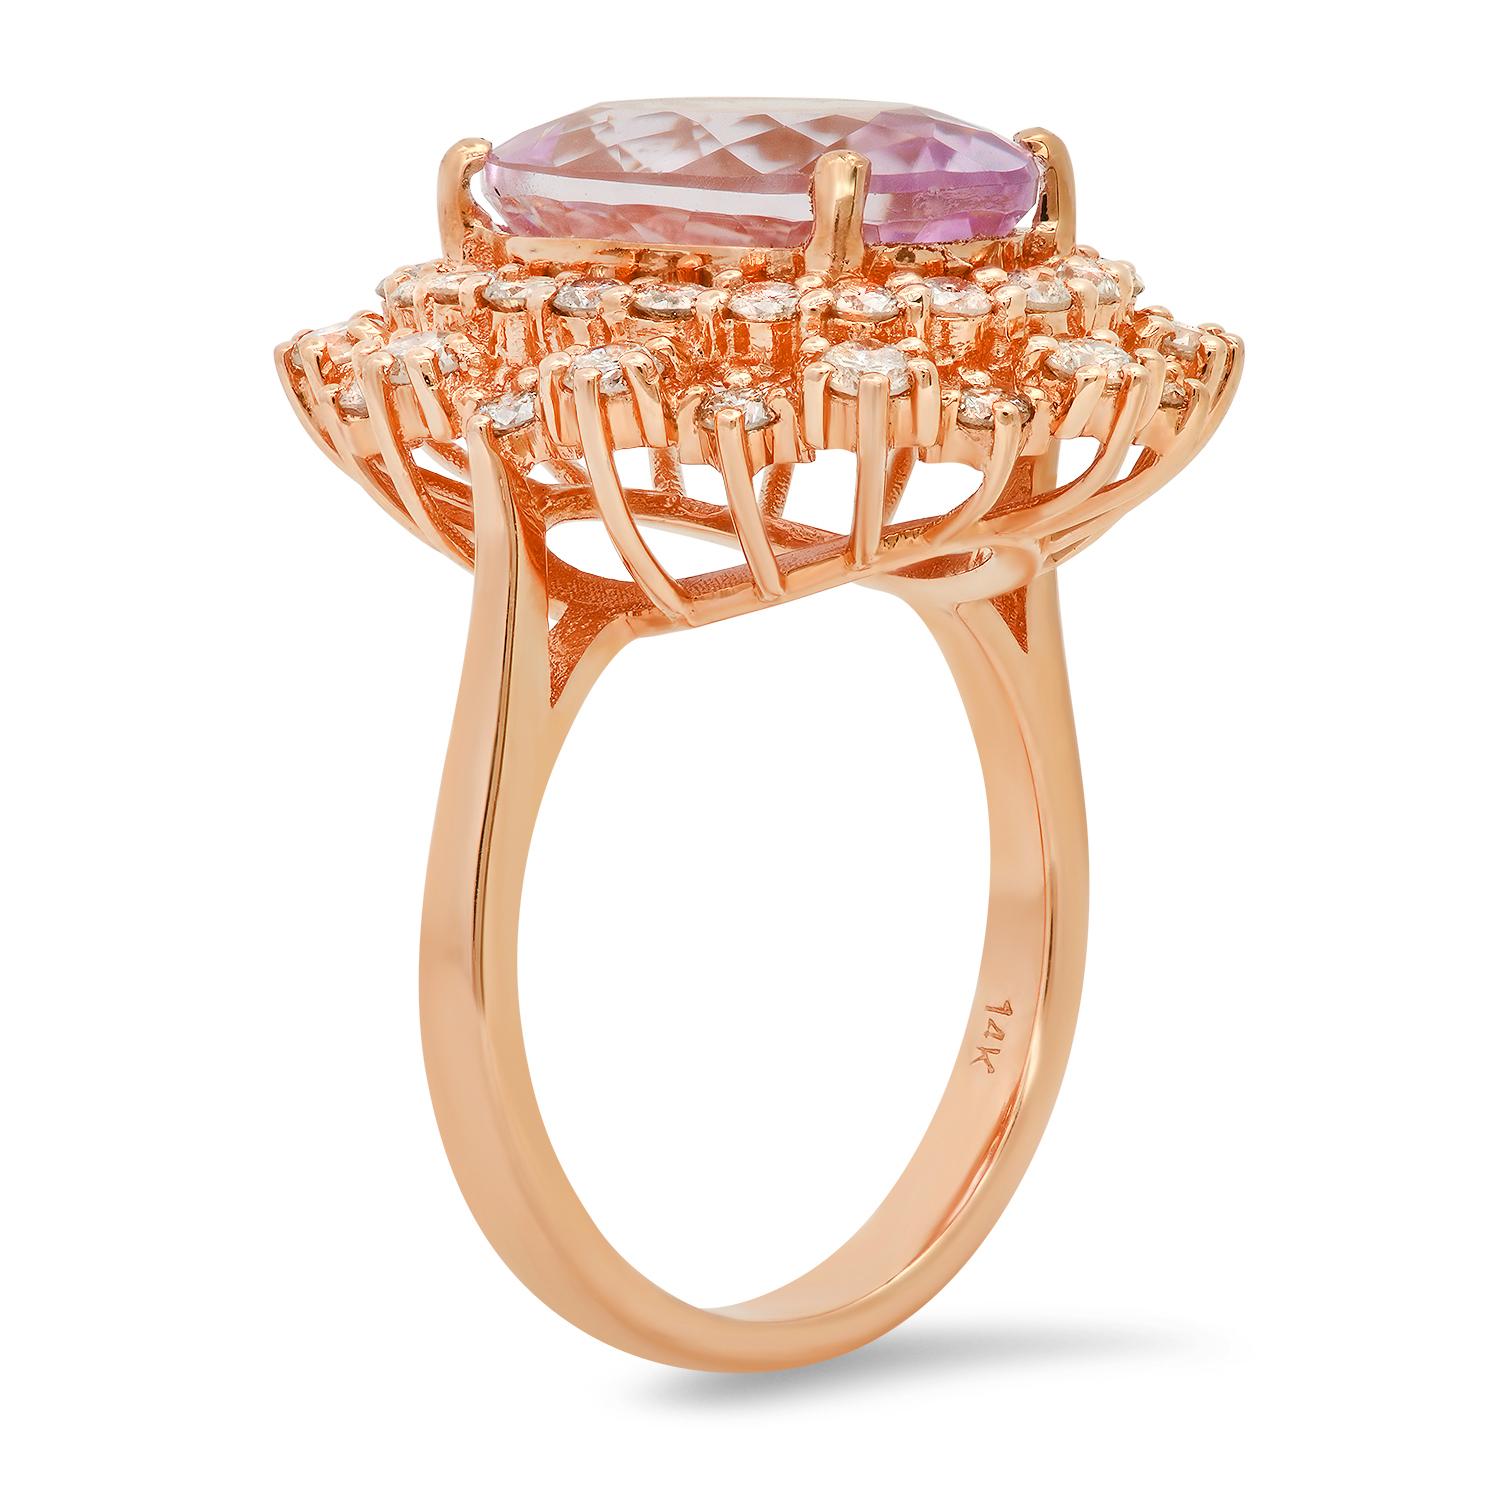 14K Rose Gold Setting with 7.5ct Kunzite and 1.48ct Diamond Ring